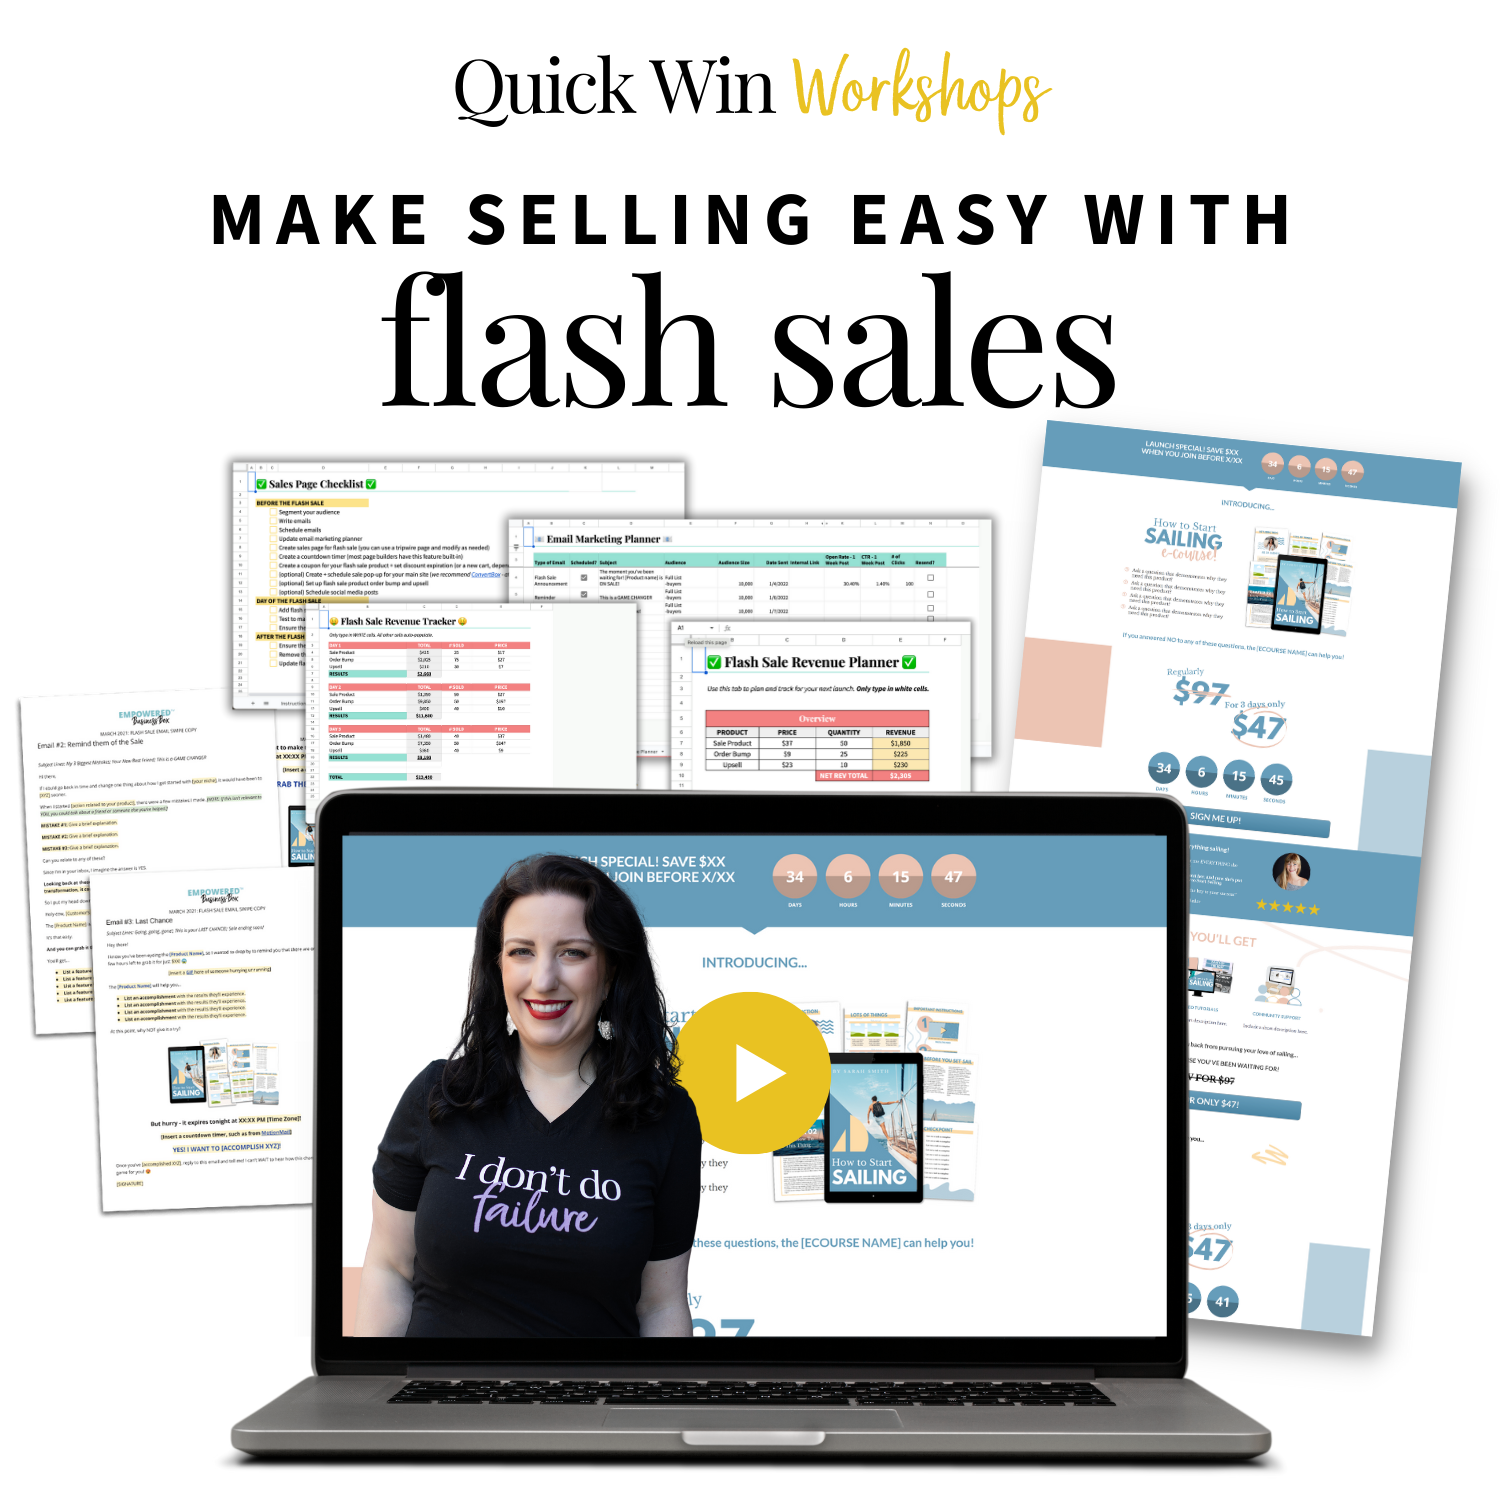 Quick Win Workshop: Make Selling Easy with Flash Sales